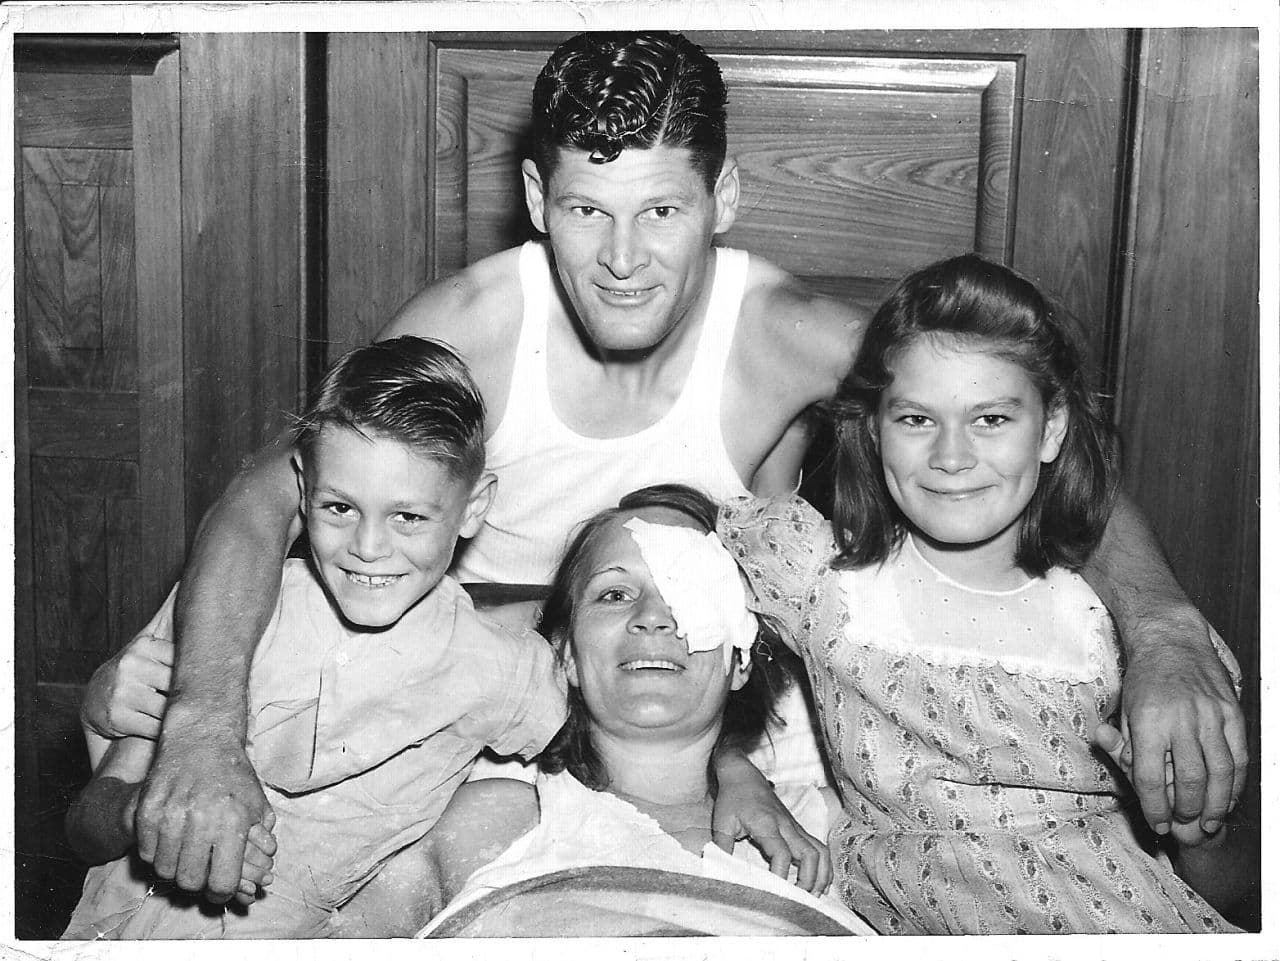 The Downs family, after their rescue from the Gulf of Mexico in 1942 (photo courtesy of Michael Tougias)